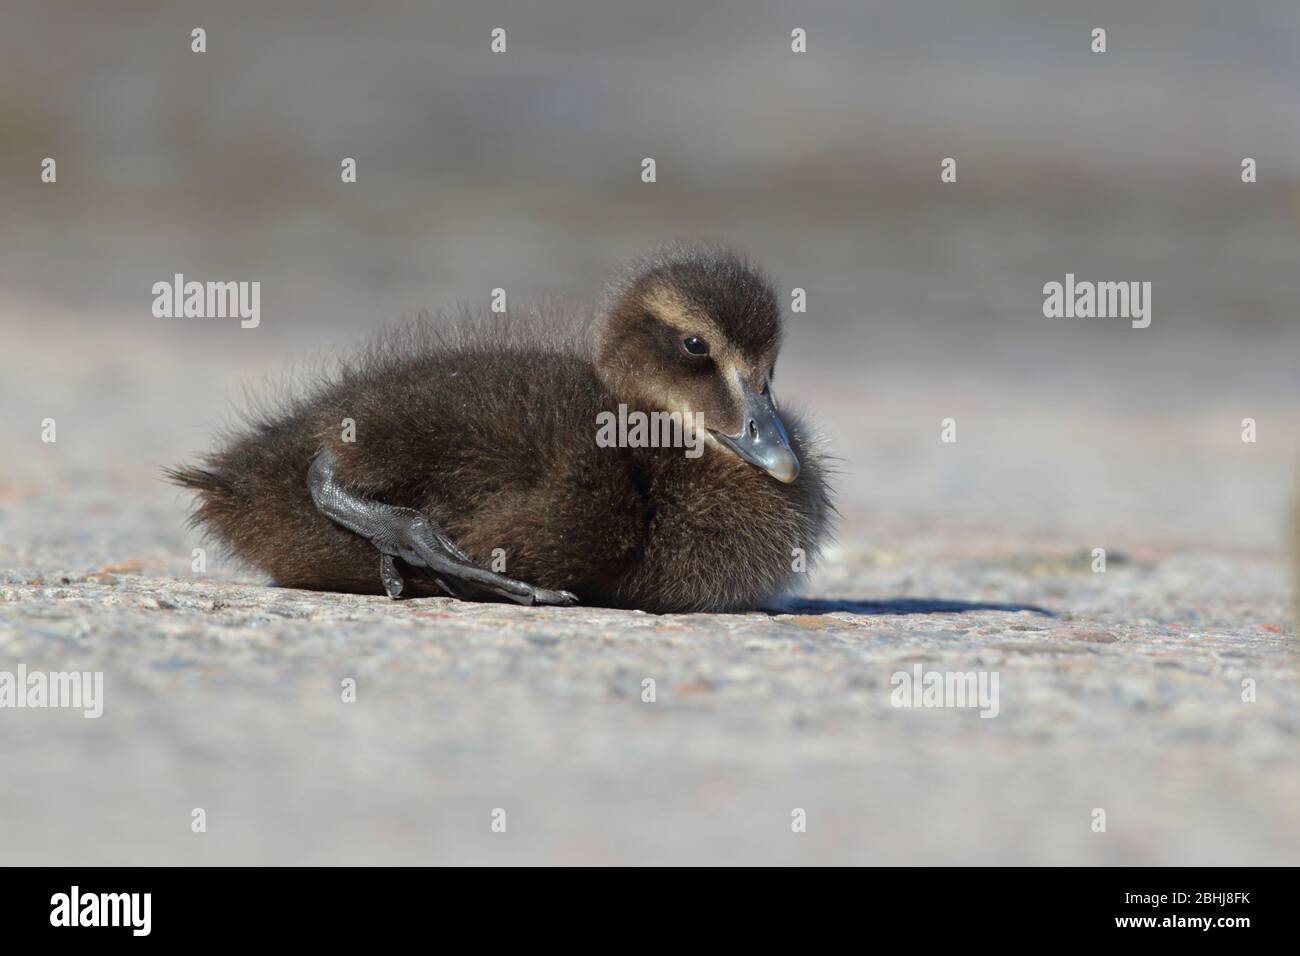 A Common Eider duckling (Somateria mollissima) in Northumberland, England in late spring/early summer Stock Photo